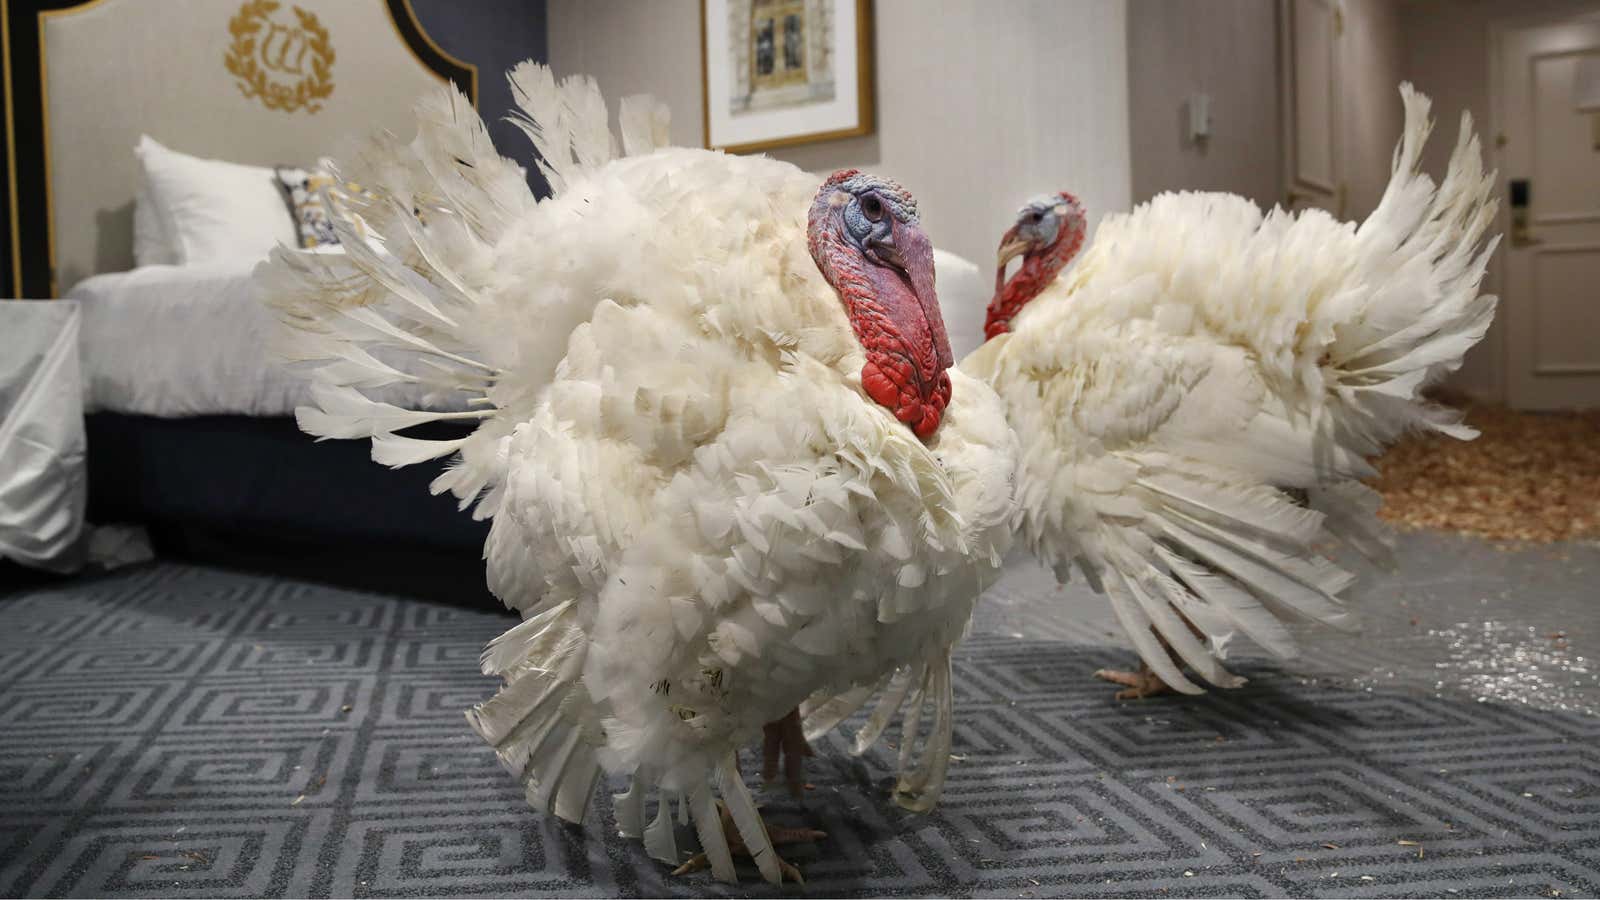 The supercharged turkey.